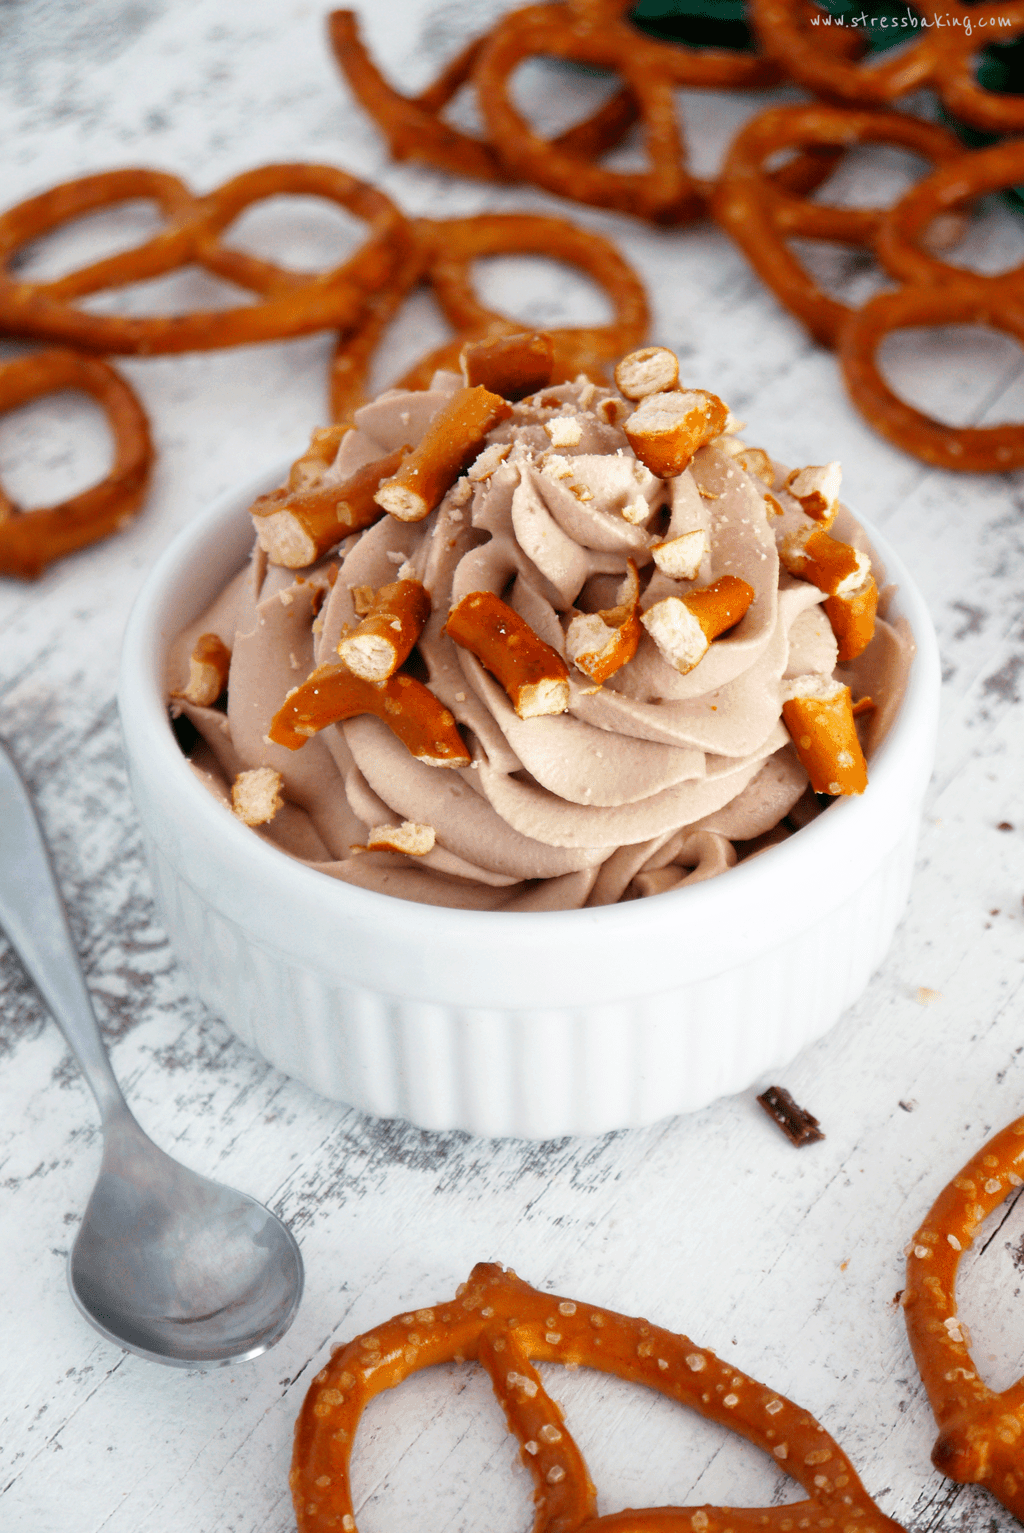 White ramekin filled with chocolate Guinness whipped cream and topped with pretzel pieces